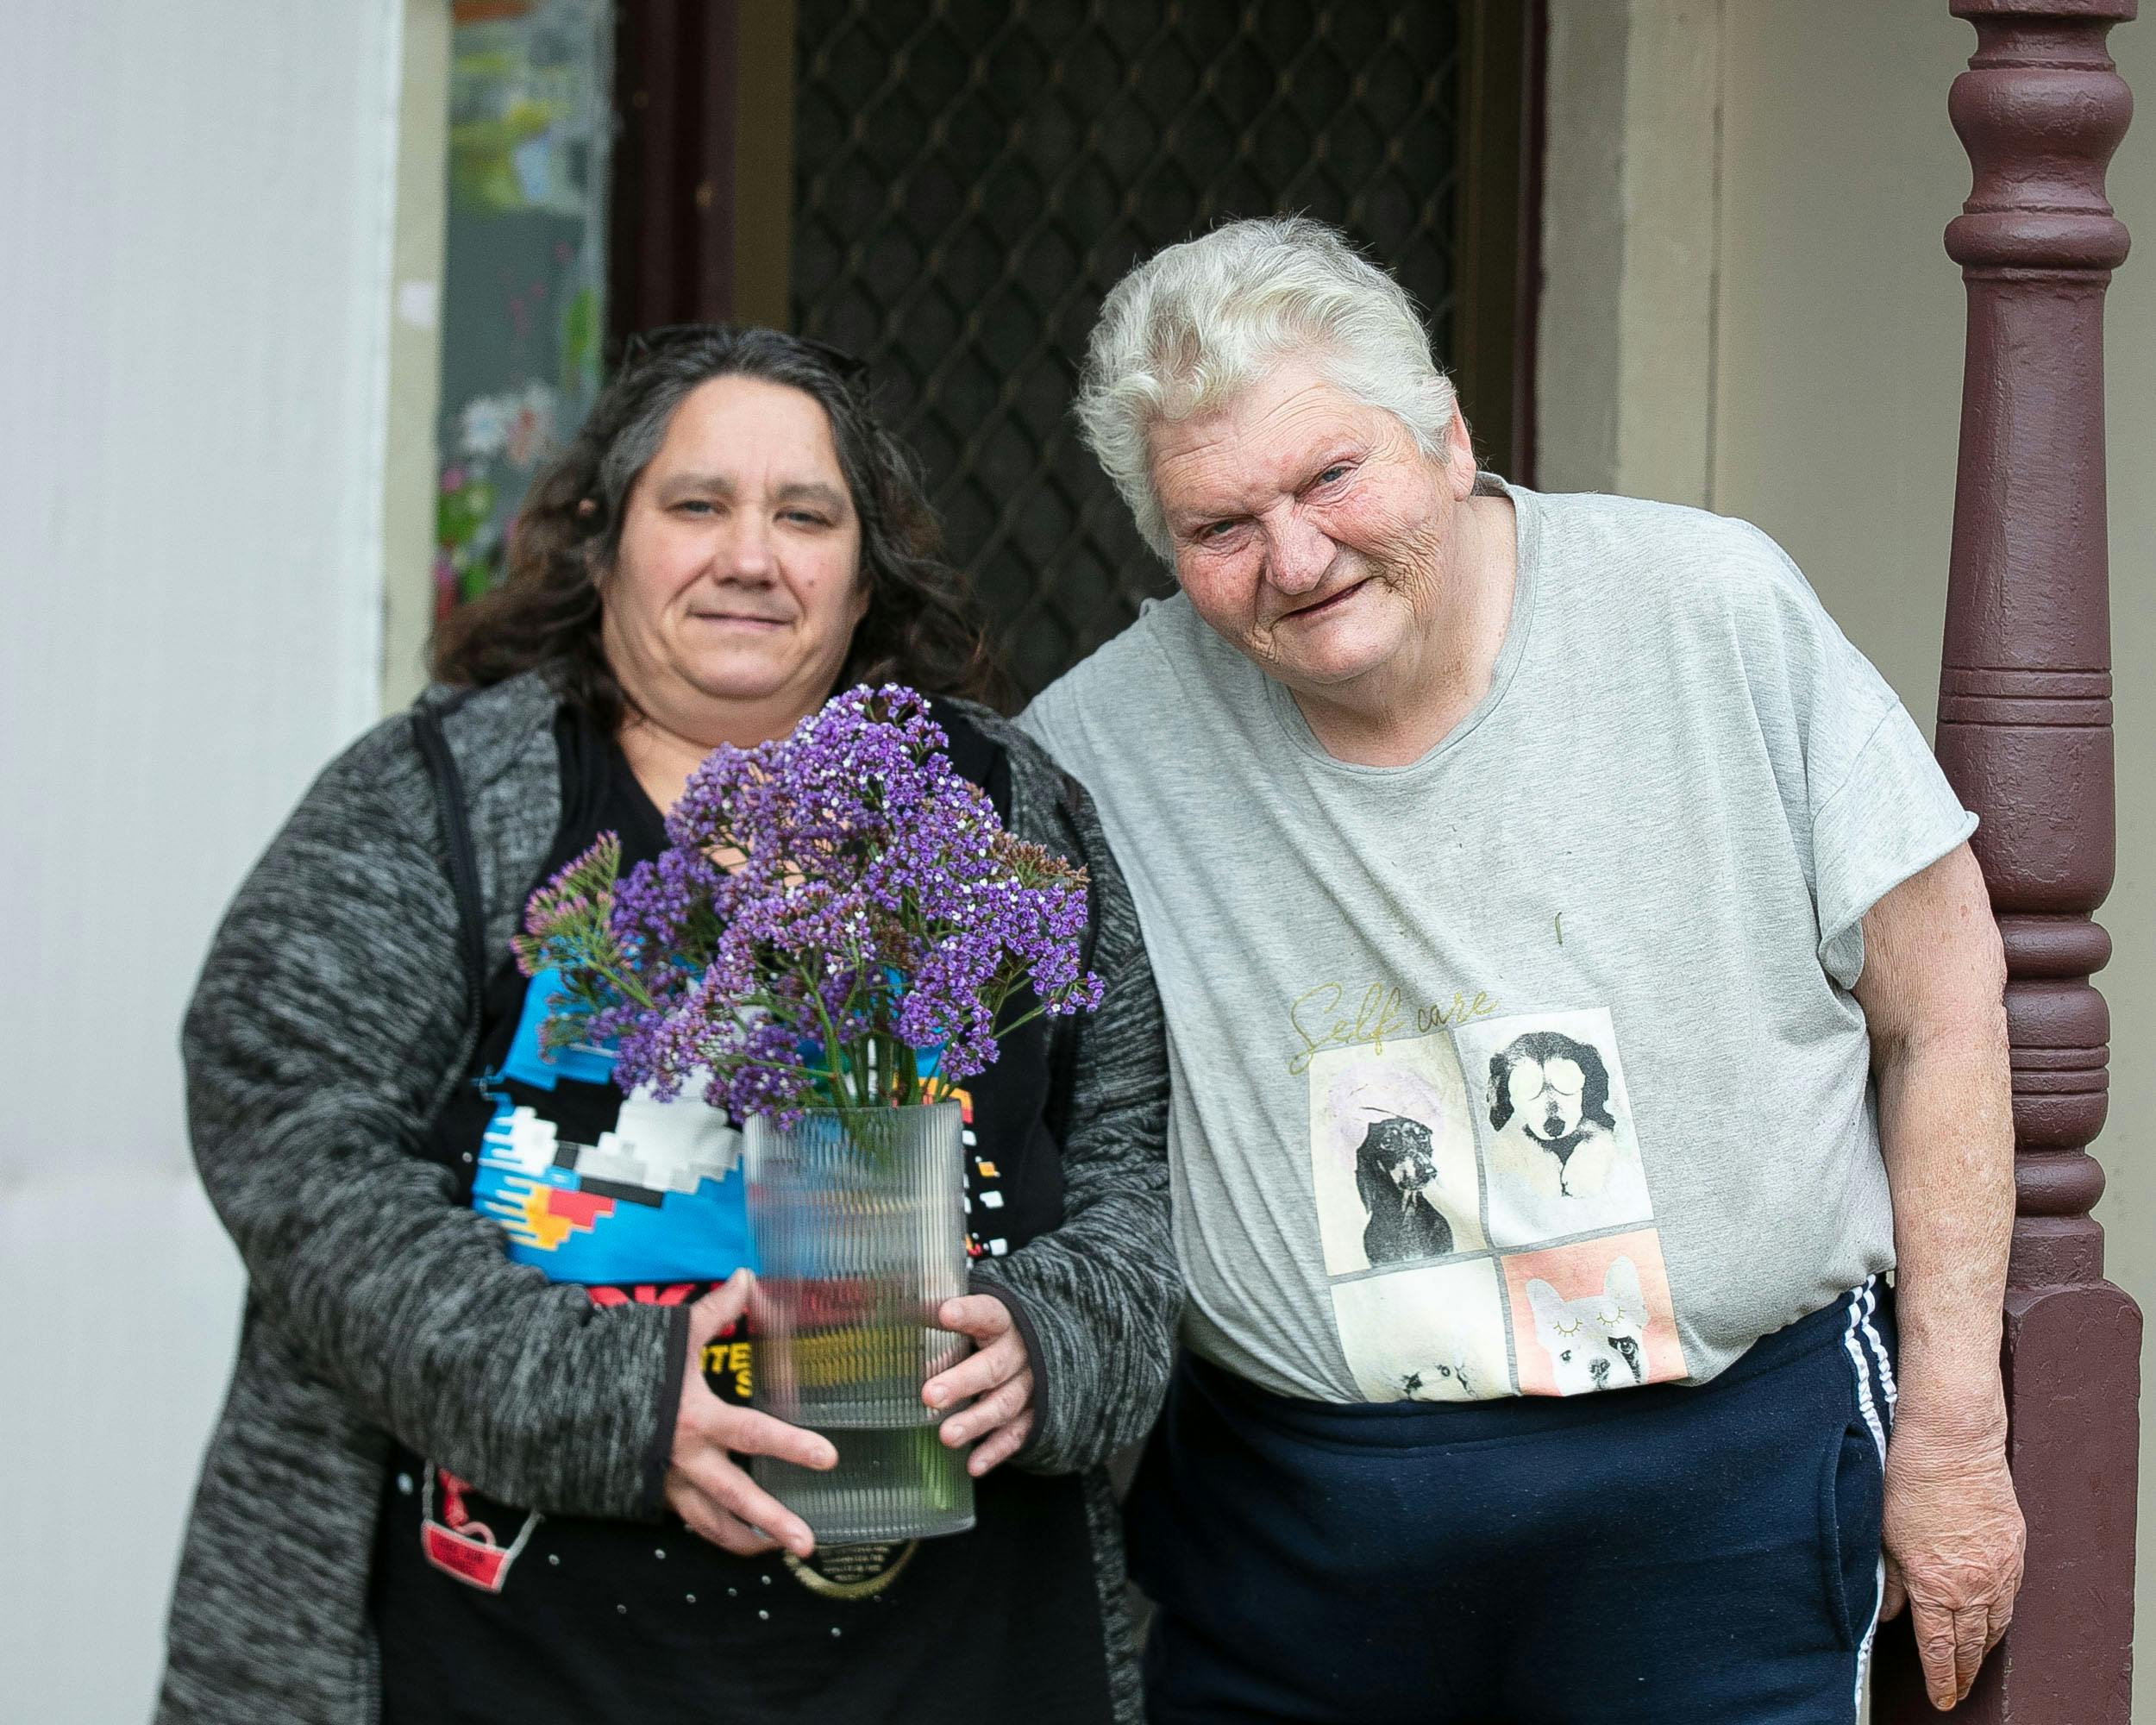 Allcare Support worker and individual smiling with flowers.